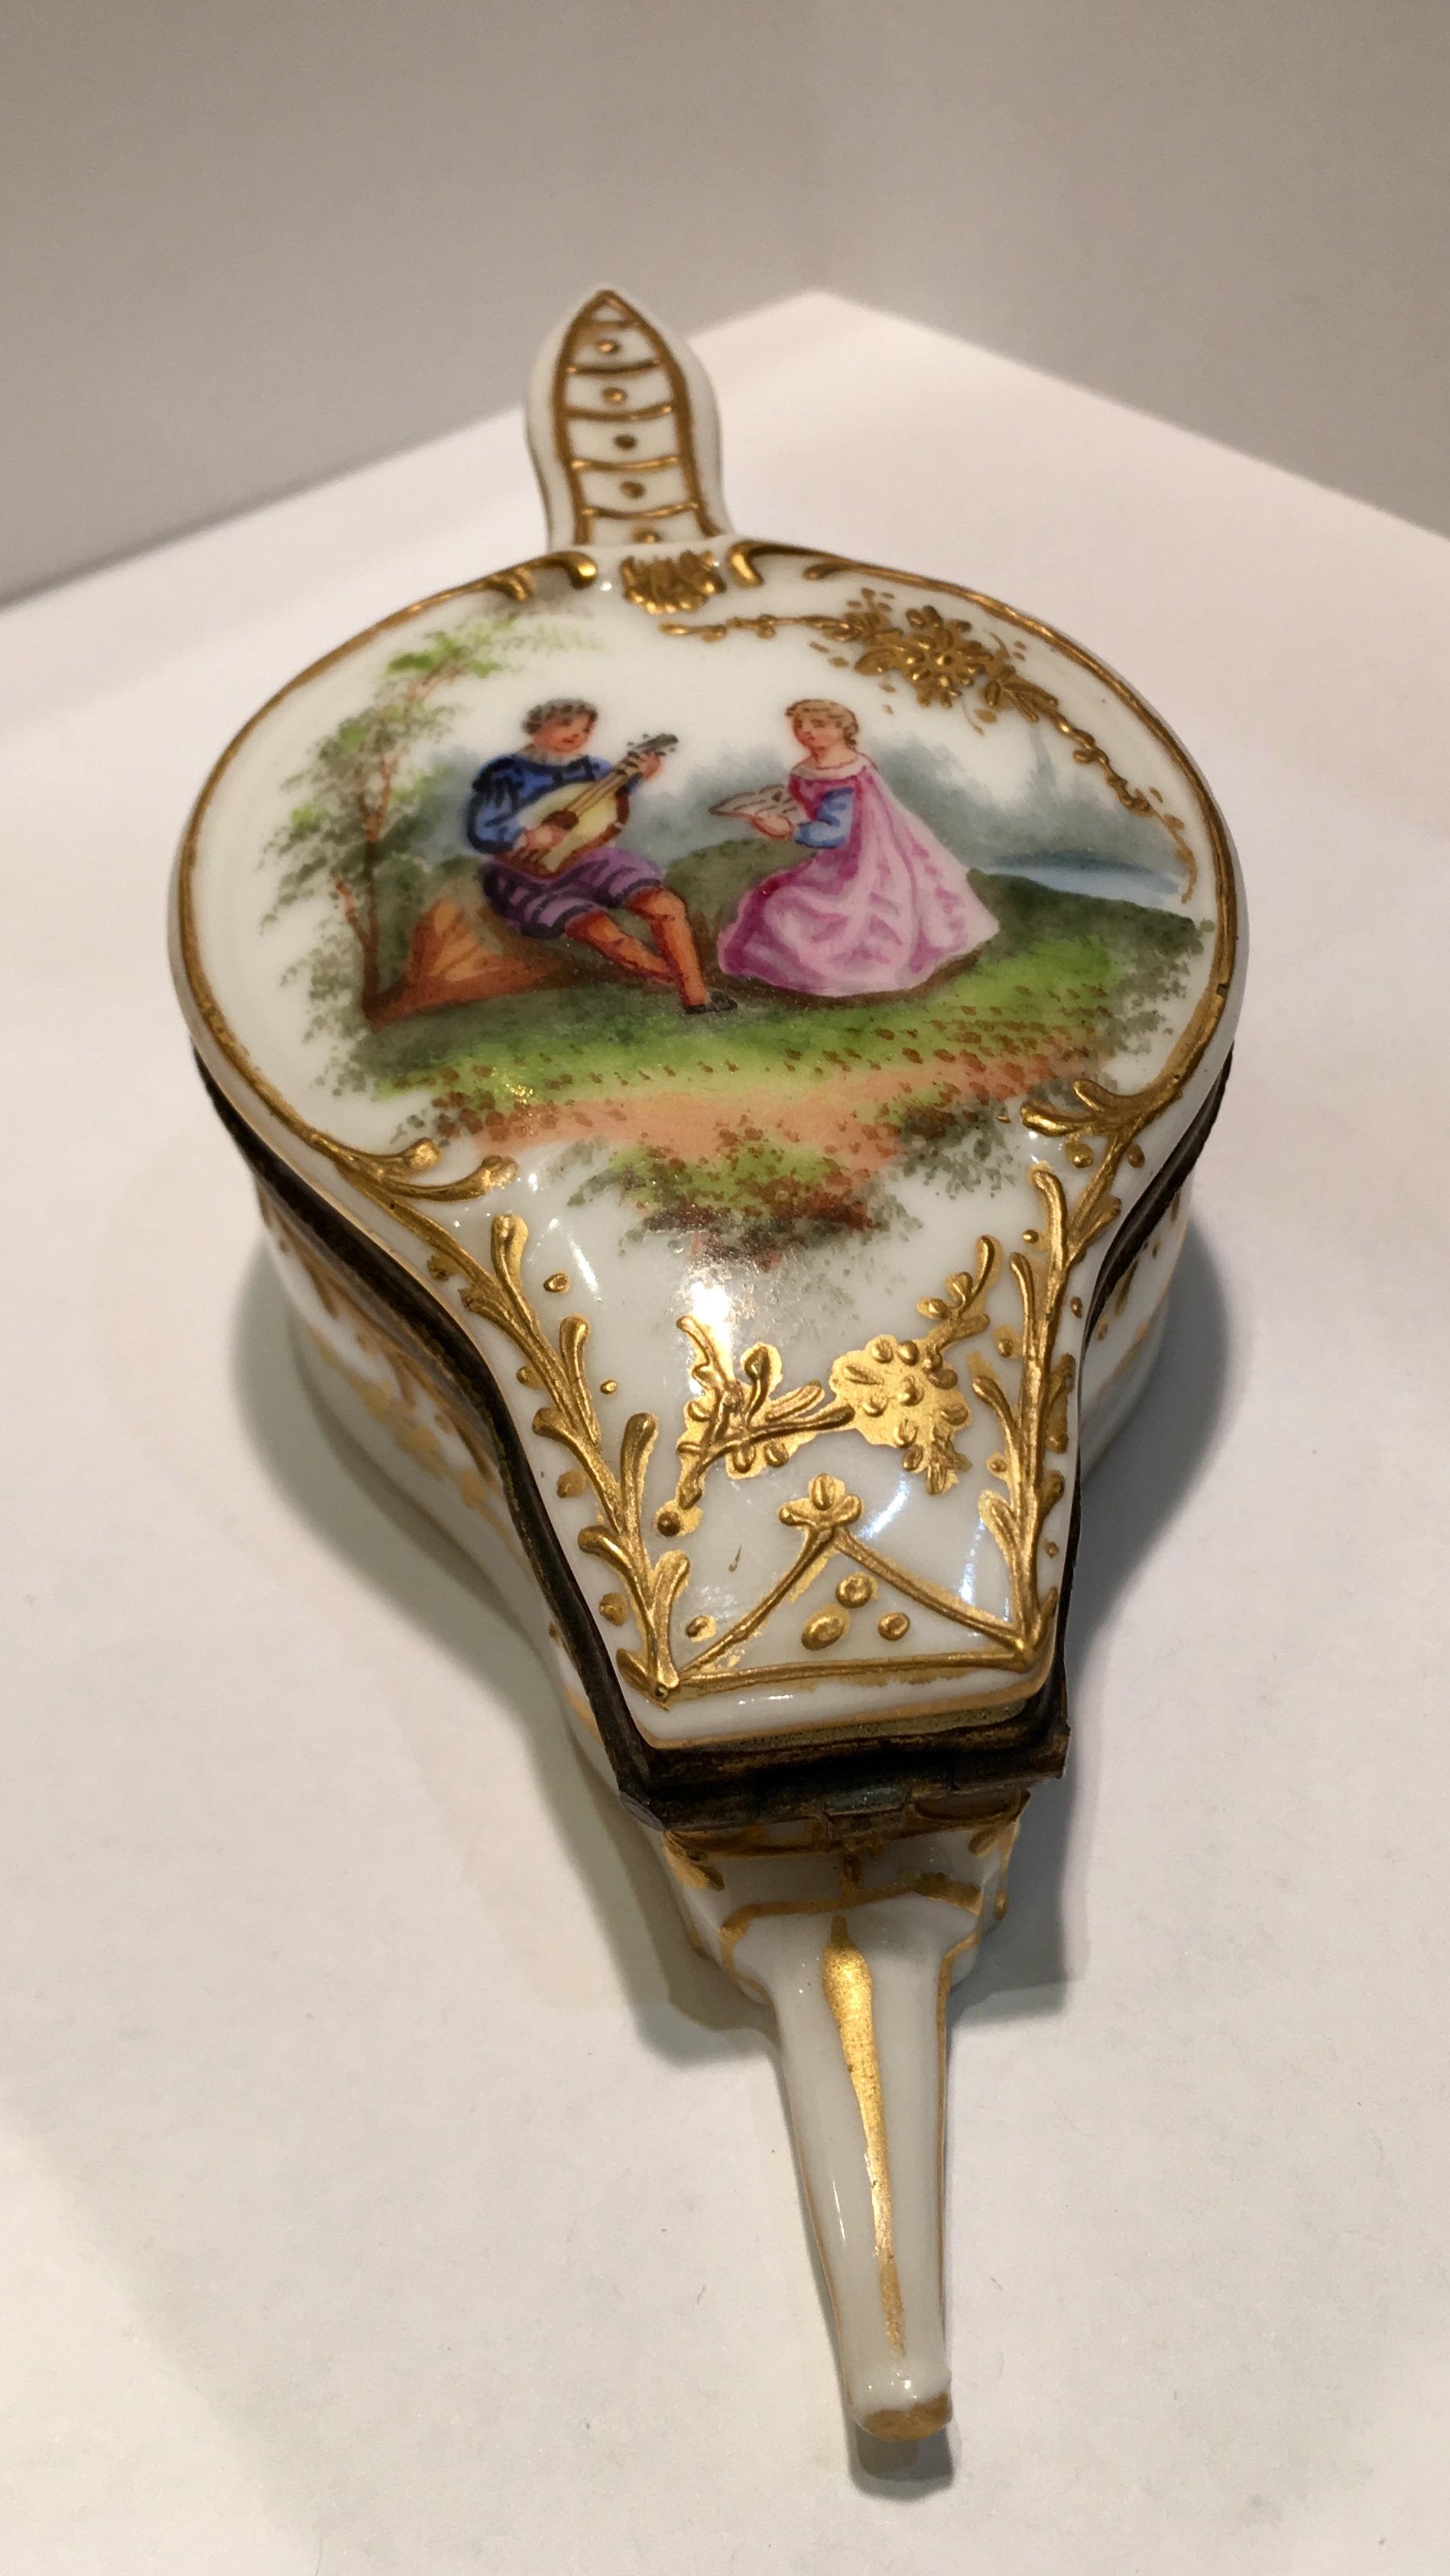 Exquisite antique French box, from the 1890s, is a handmade and hand painted miniature porcelain box with hinged lid and is shaped like a fire bellows. The interior of the box is hand painted in rich 24 karat gold. Lid features a romantic vignette